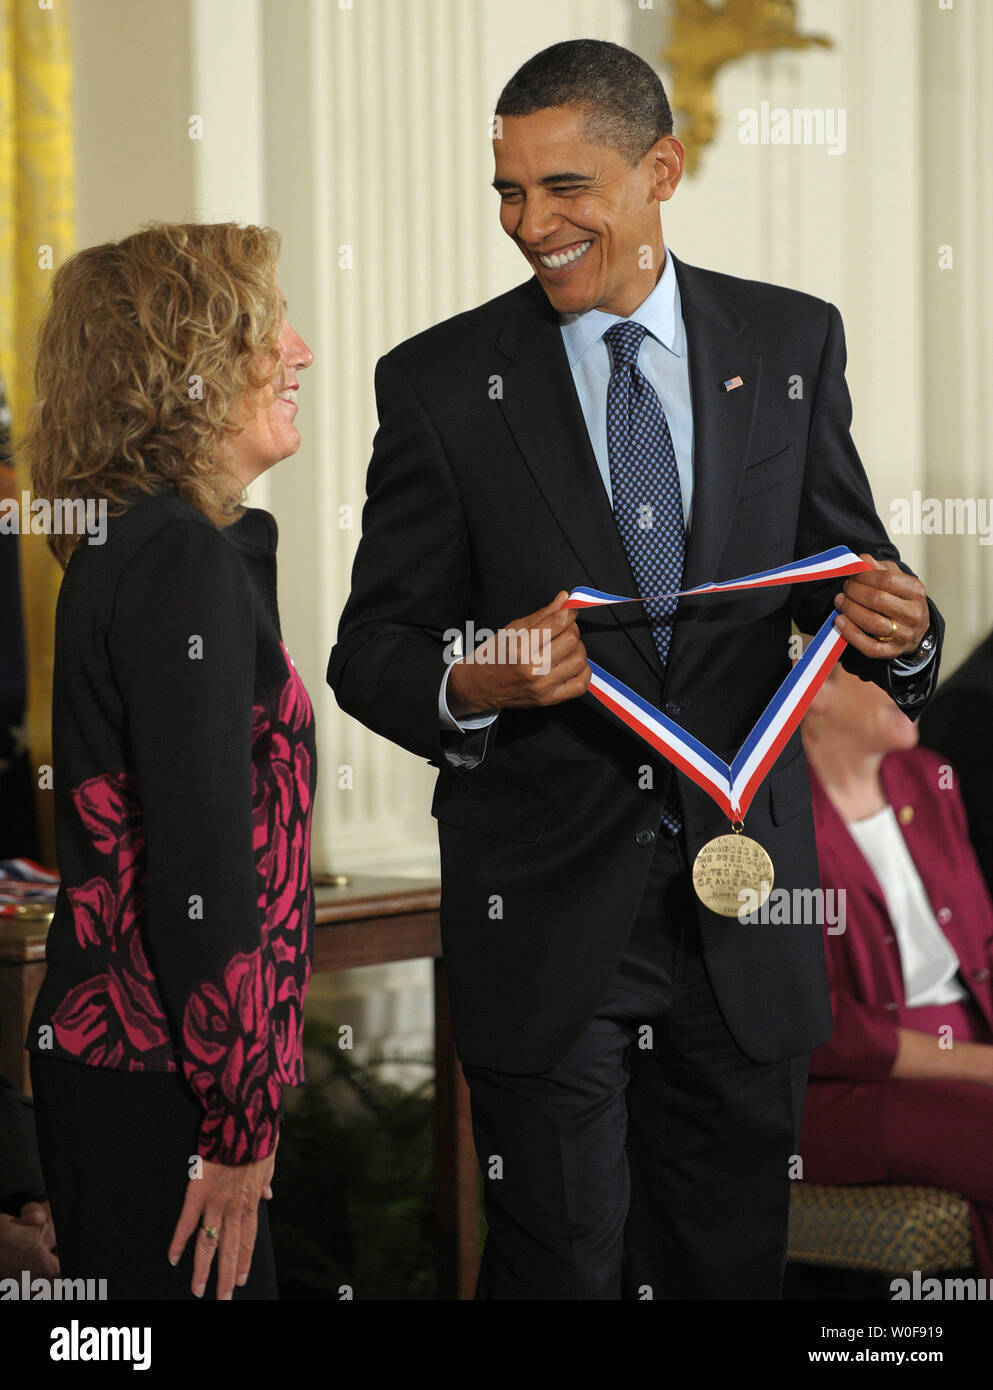 U.S. President Barack Obama awards Dr. Elaine Fuchs a National Medal of Science in the East Room of the White House in Washington on October 7, 2009. Fuchs was honored for 'her pioneering use of cell biology and molecular genetics in mice to understand the basis of inherited diseases in humans and her outstanding contributions to our understandings of the biology of skin and its disorders, including her notable investigations of adult skin stem cells, cancers, and genetic syndromes.'   UPI/Roger L. Wollenberg Stock Photo